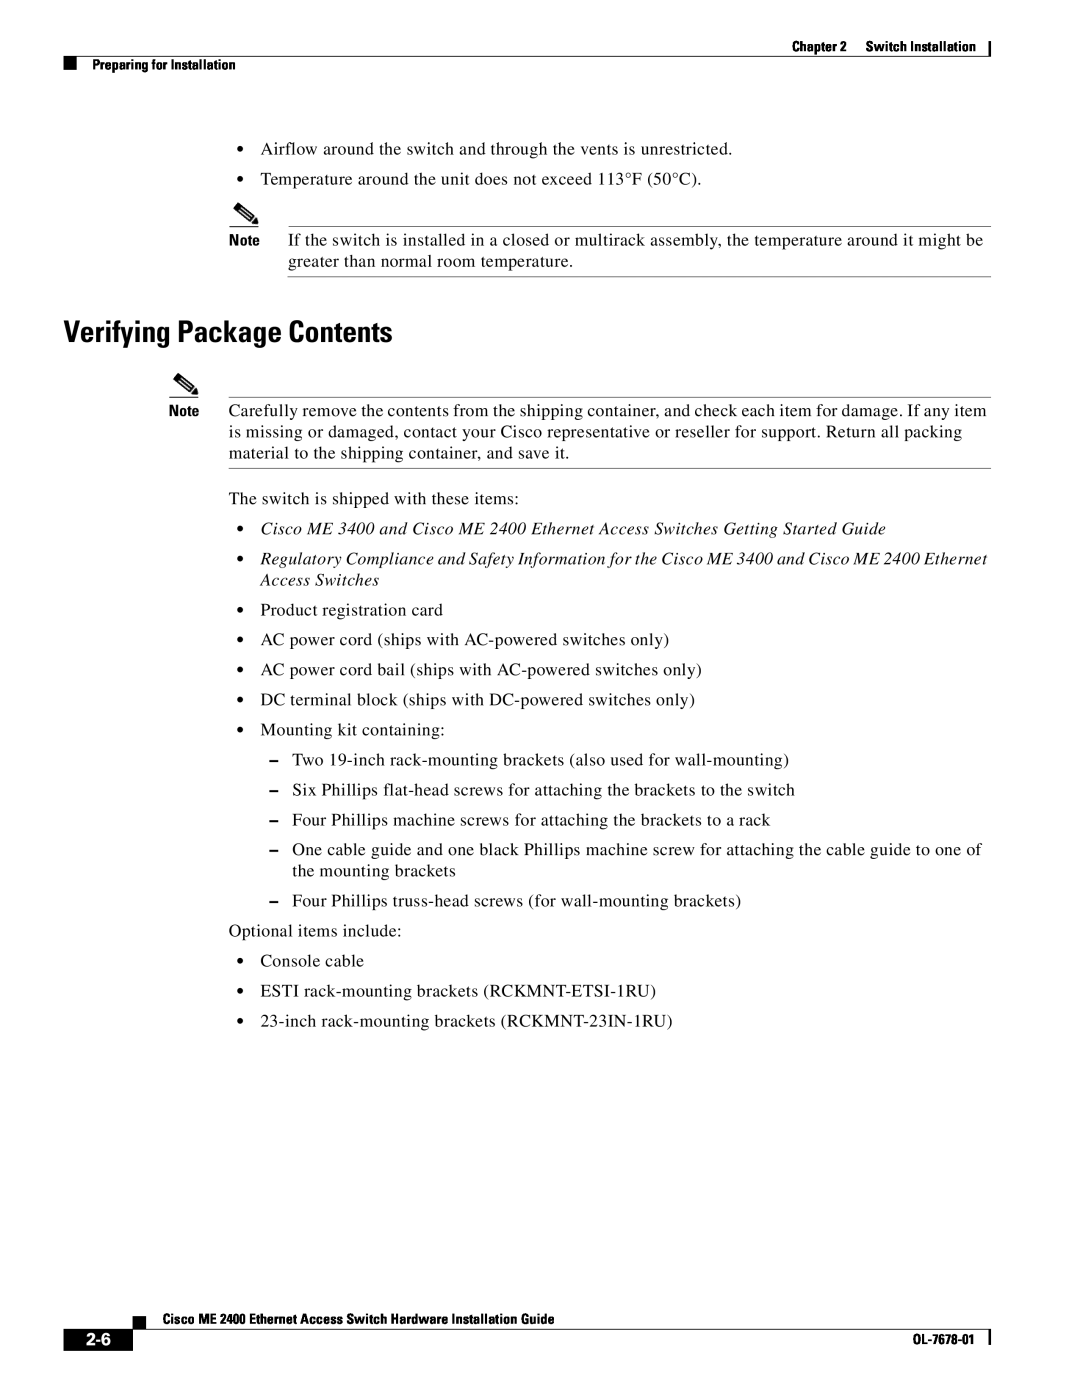 Cisco Systems ME 2400 manual Verifying Package Contents 